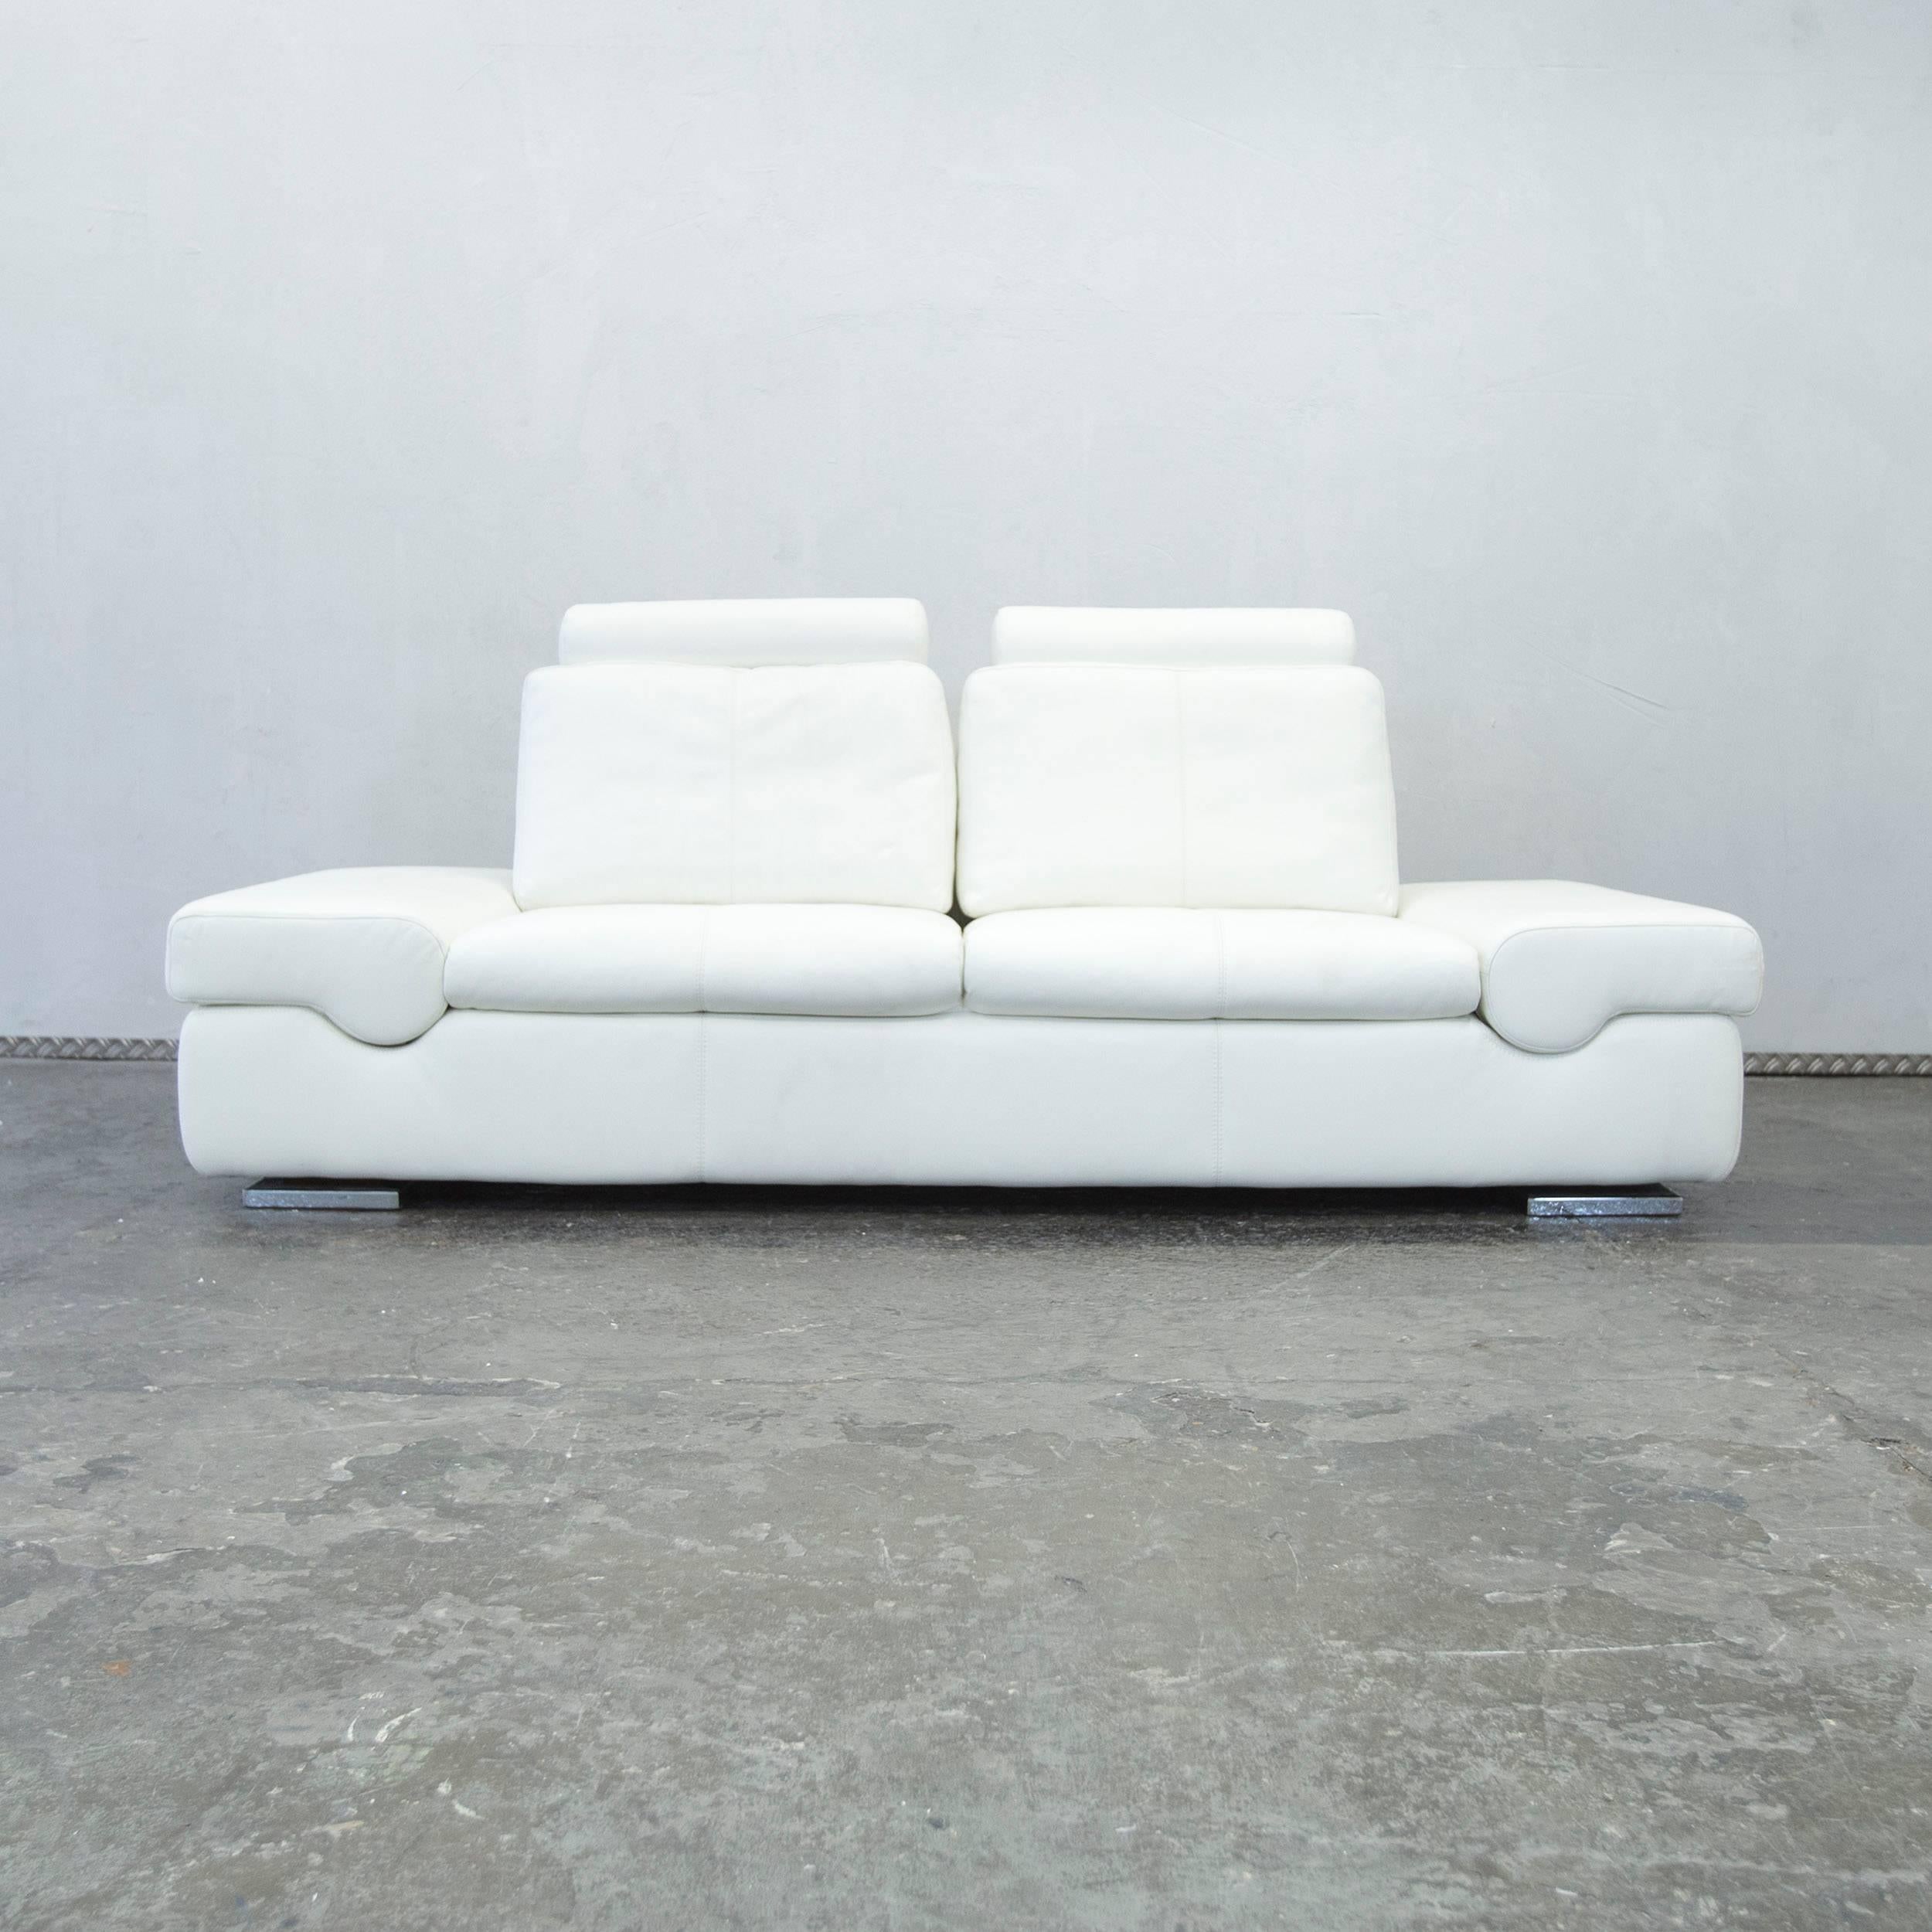 Musterring Linea Designer Leather Sofa White Three-seat Function Couch Modern In Excellent Condition For Sale In Cologne, DE